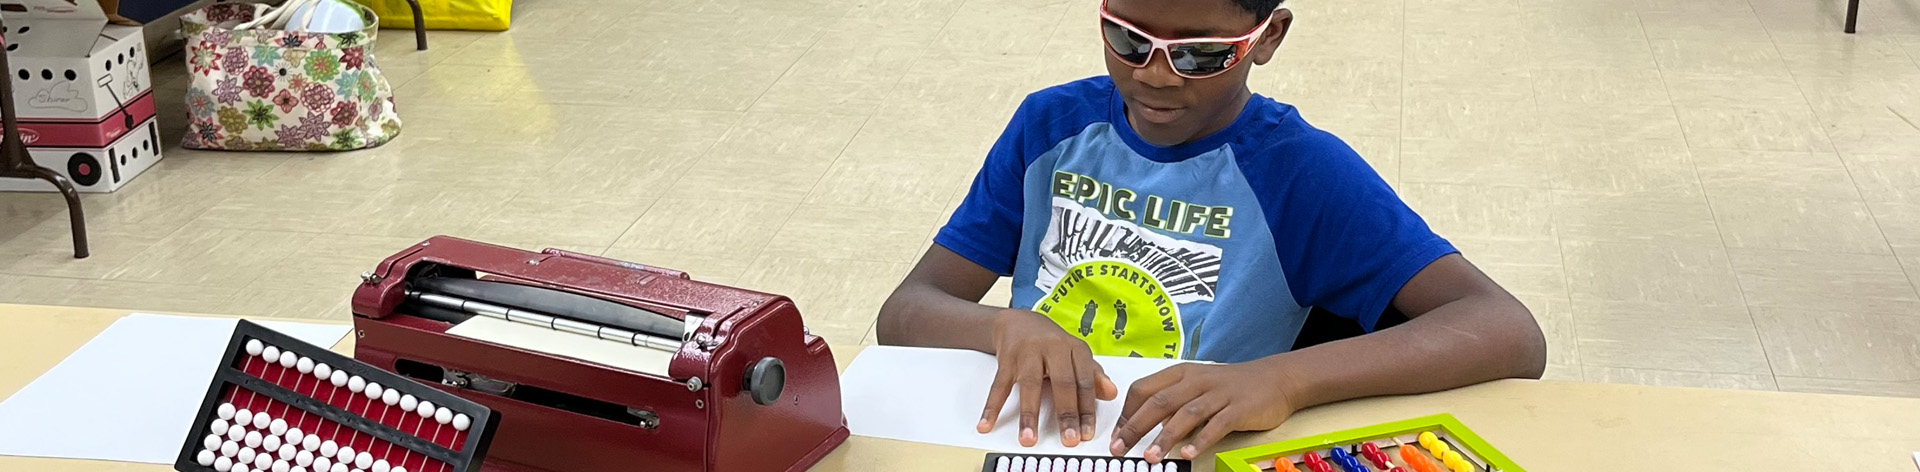 A young boy smiles as he reads from a Braille page during a Connecticut BELL Academy.